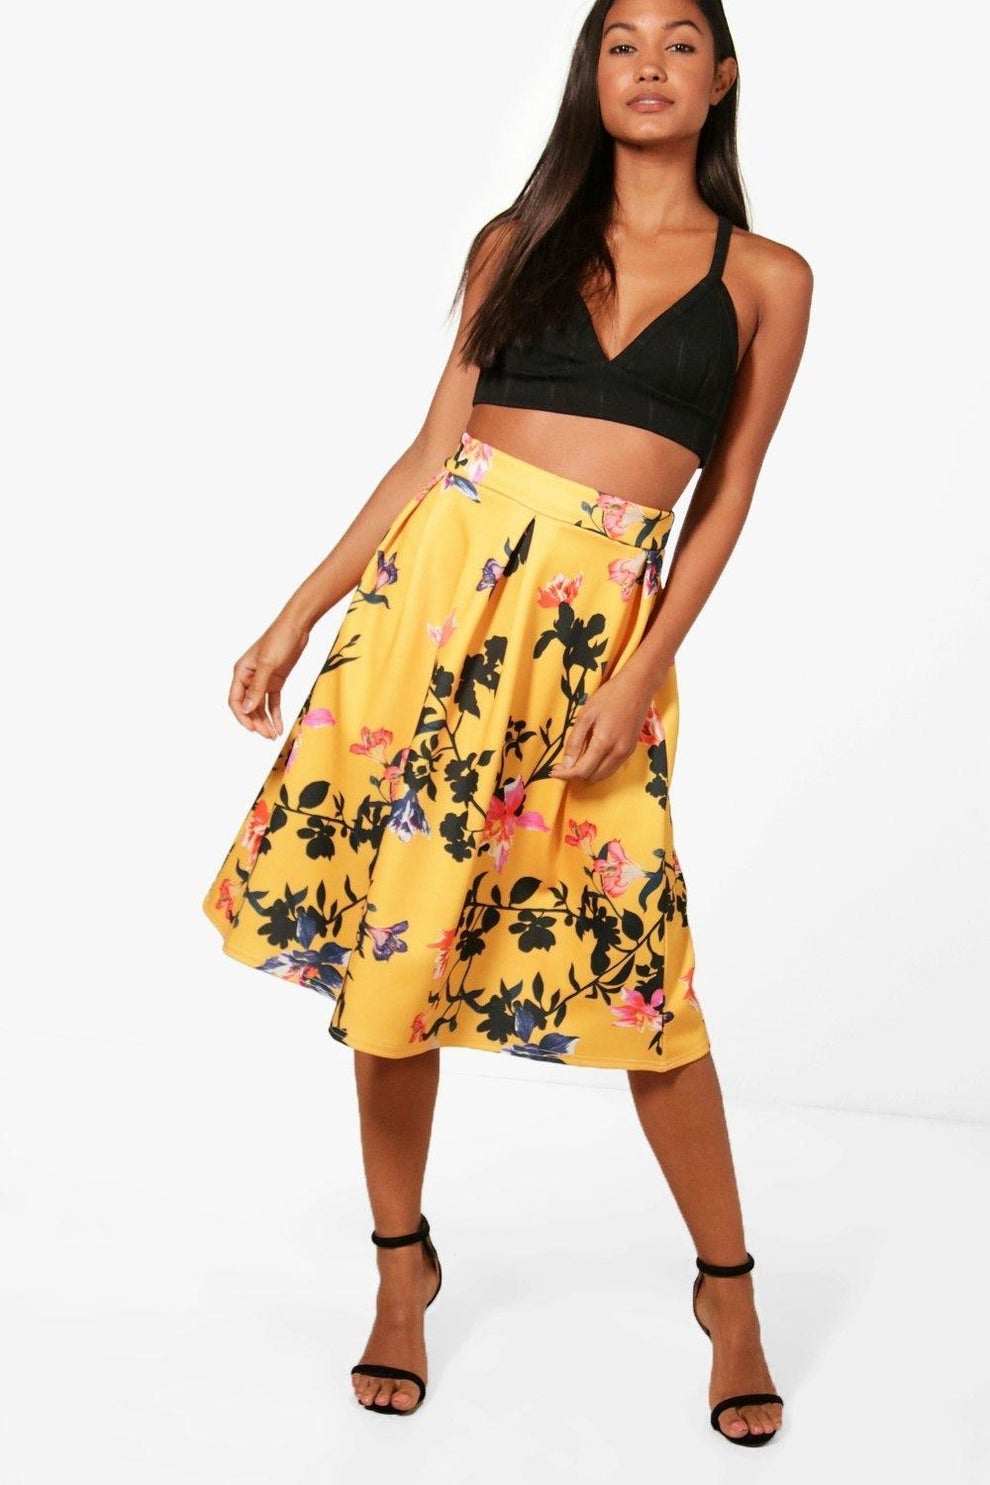 28 Utterly Amazing Things You Should Buy From Boohoo Right Now